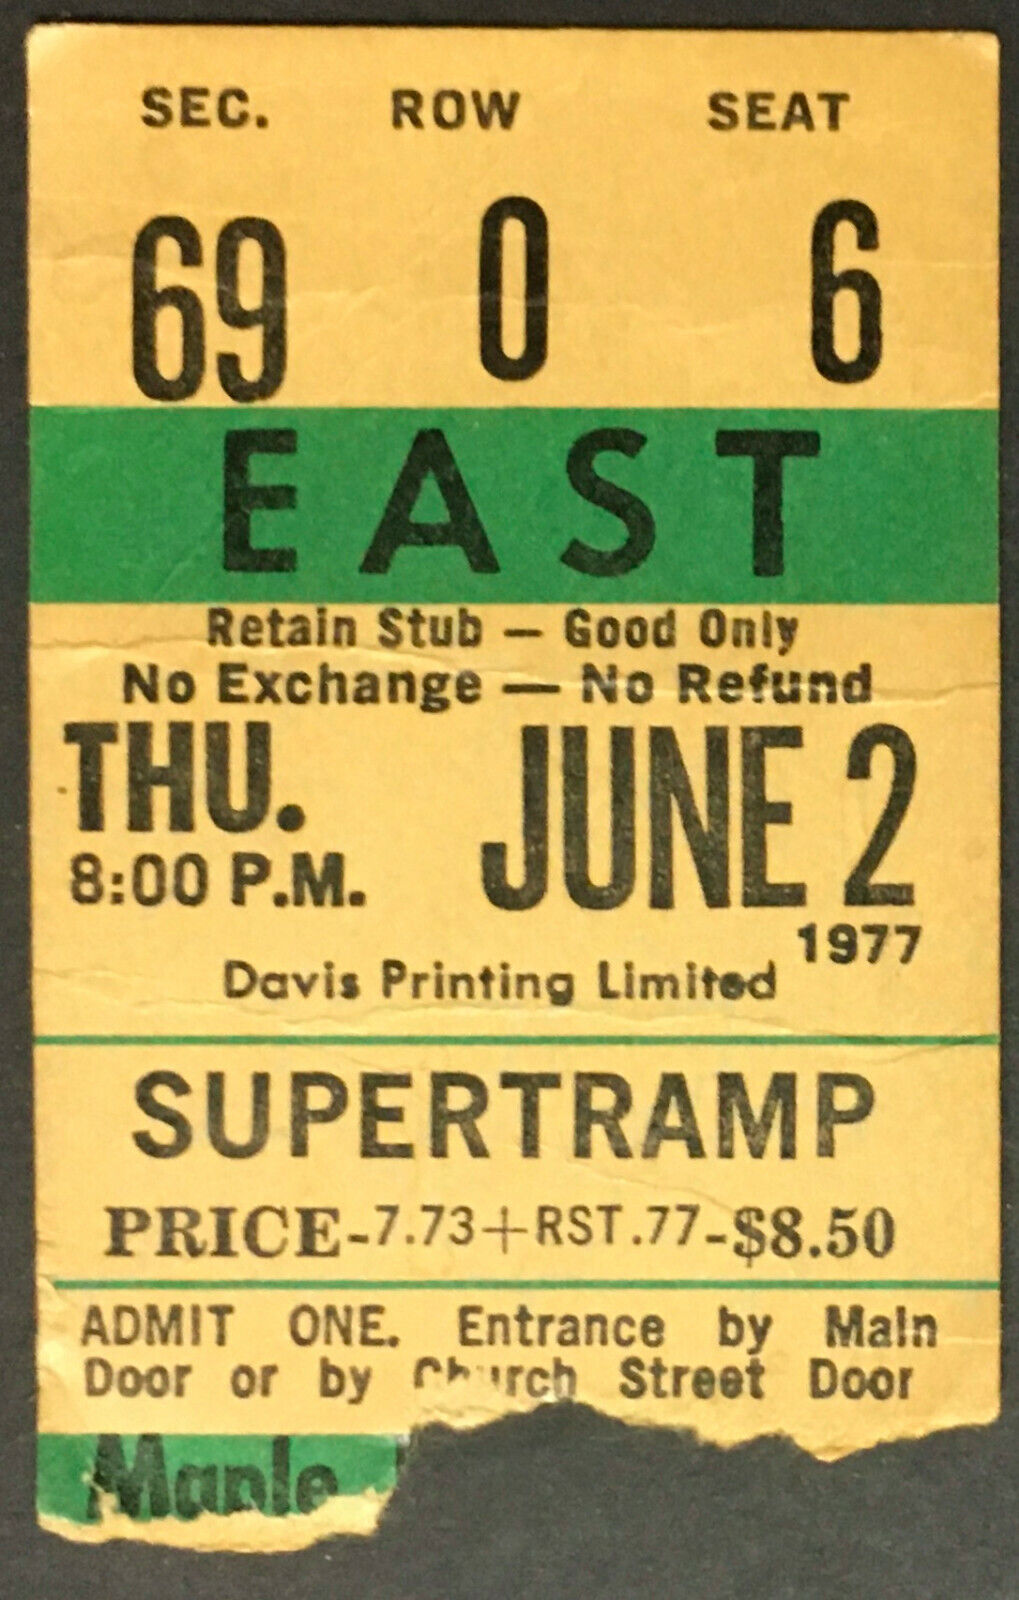 1977 Supertramp Concert Ticket Maple Leaf Gardens Even In The Quietest Moments